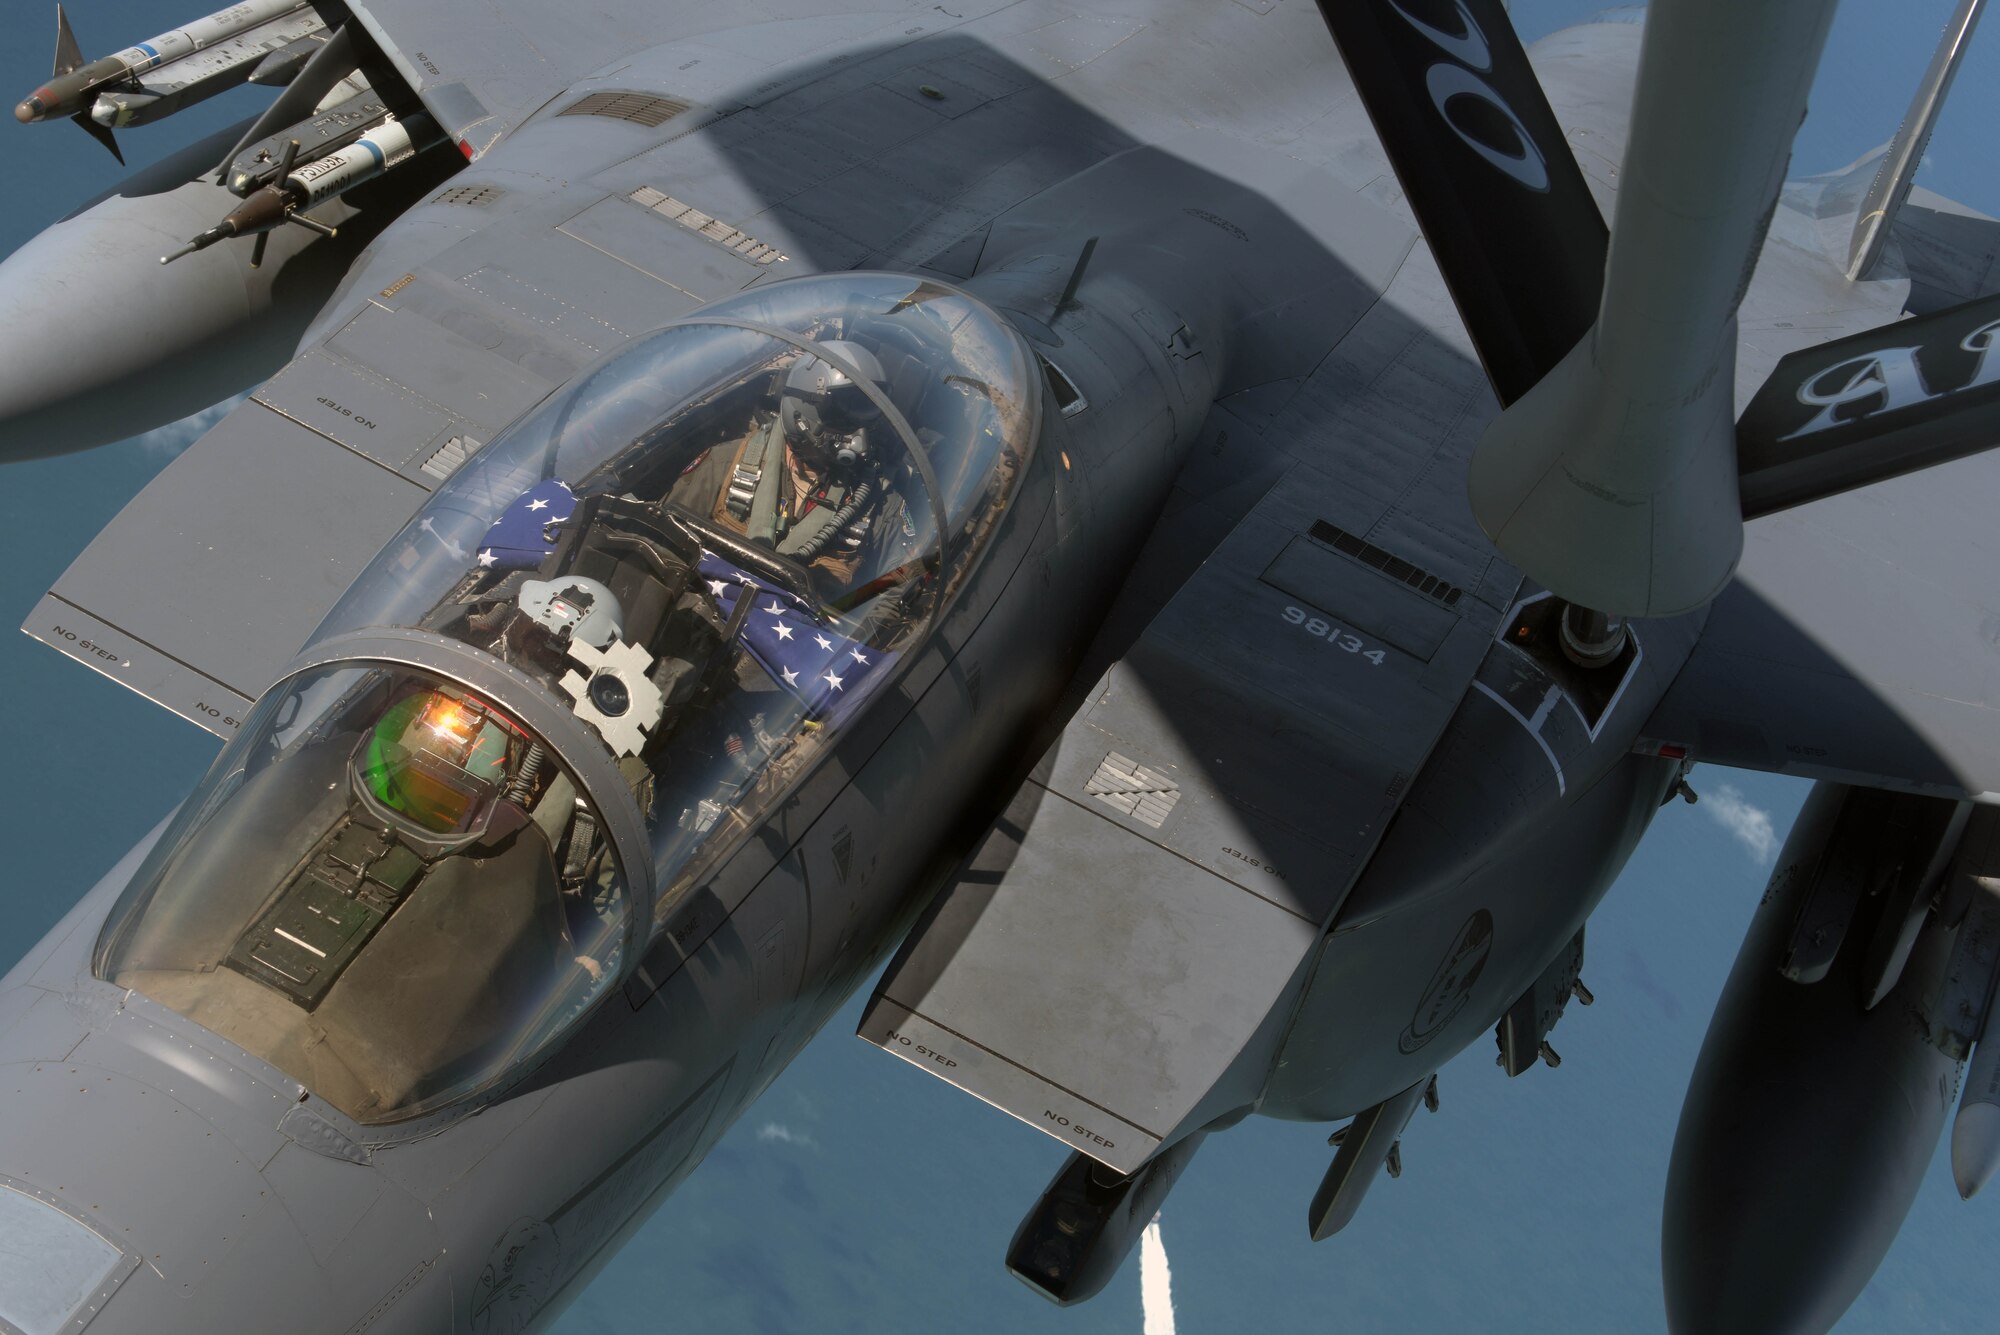 A U.S. Air Force F-15E Strike Eagle, assigned to the 492nd Fighter Squadron  at RAF Lakenheath, England, receives fuel from a U.S. Air Force KC-135 Stratotanker off the Southern coast of England, June 6, 2019. The Strike Eagle received fuel before taking part in a flight to commemorate the 75th anniversary of D-Day over France. Highlighting the strength of the U.S. commitment to European security, U.S. Air Force aircraft and other allied forces performed commemorative airborne operations across the European theater in support of the 75th anniversary of D-Day. (U.S. Air Force photo by Senior Airman Benjamin Cooper)